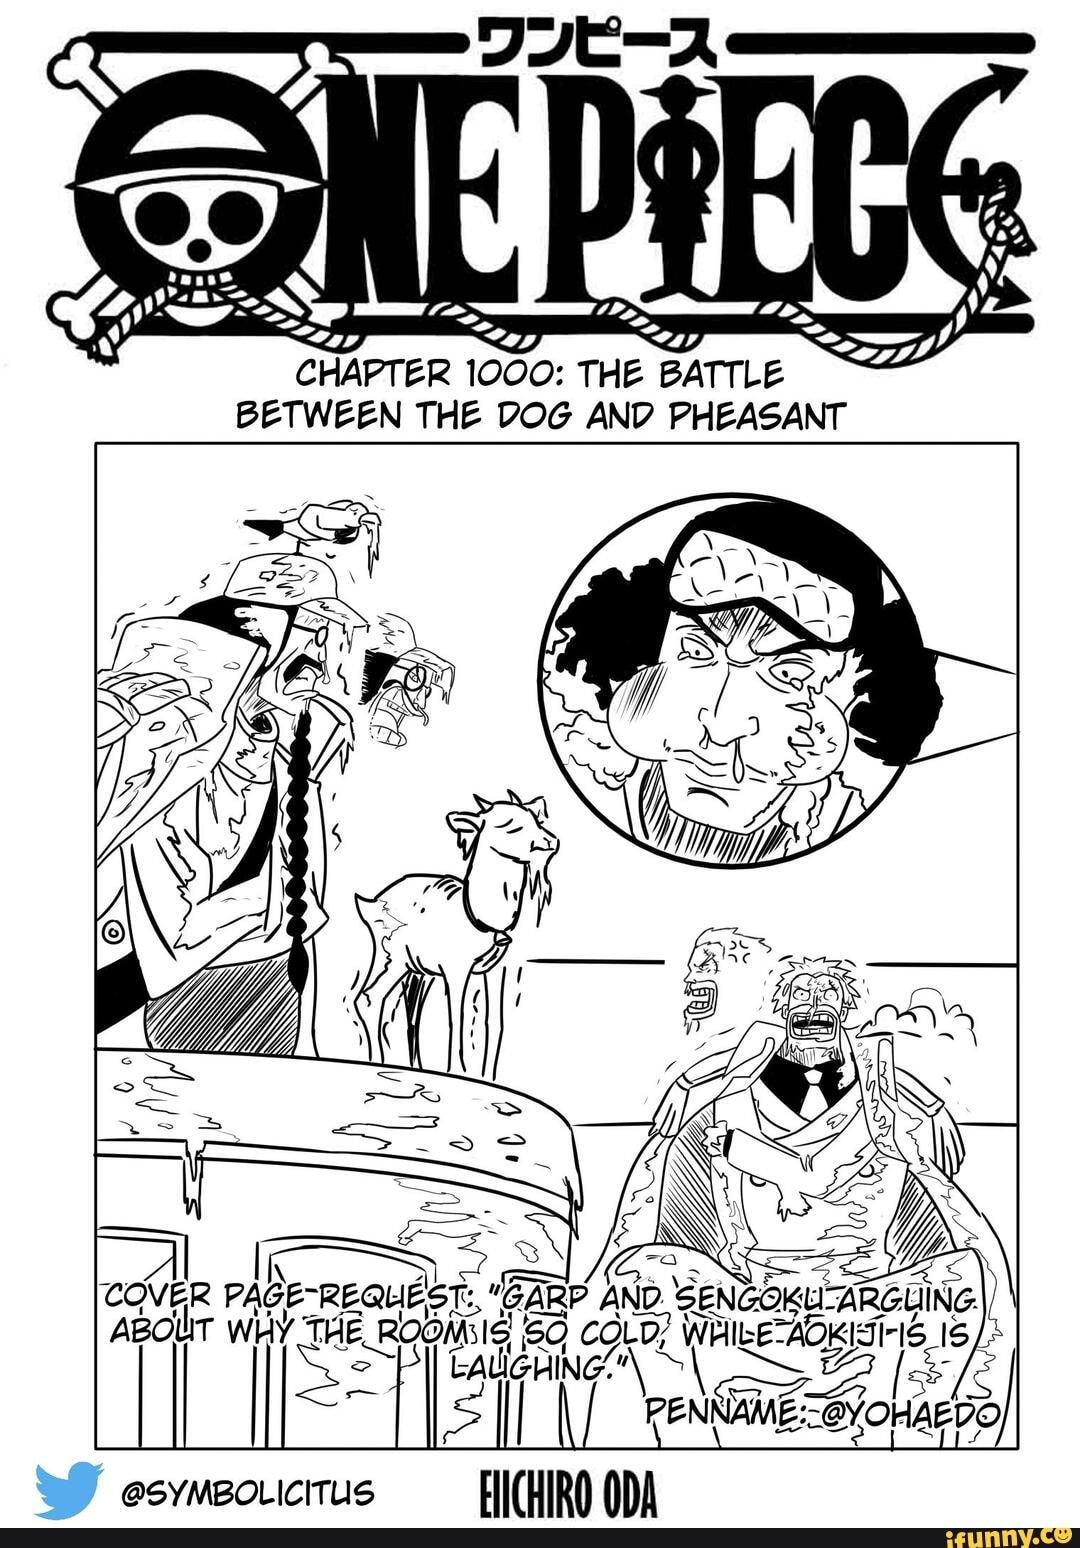 One Piece Fan Chapter Akainu Vs Aokiji Chapter 1000 The Battle Between The Dog And Pheasant Cover Page Request Garp And S Abolit Why The Roomsig Cold While Aokiitiis Ill I Symbolicitus Fichira